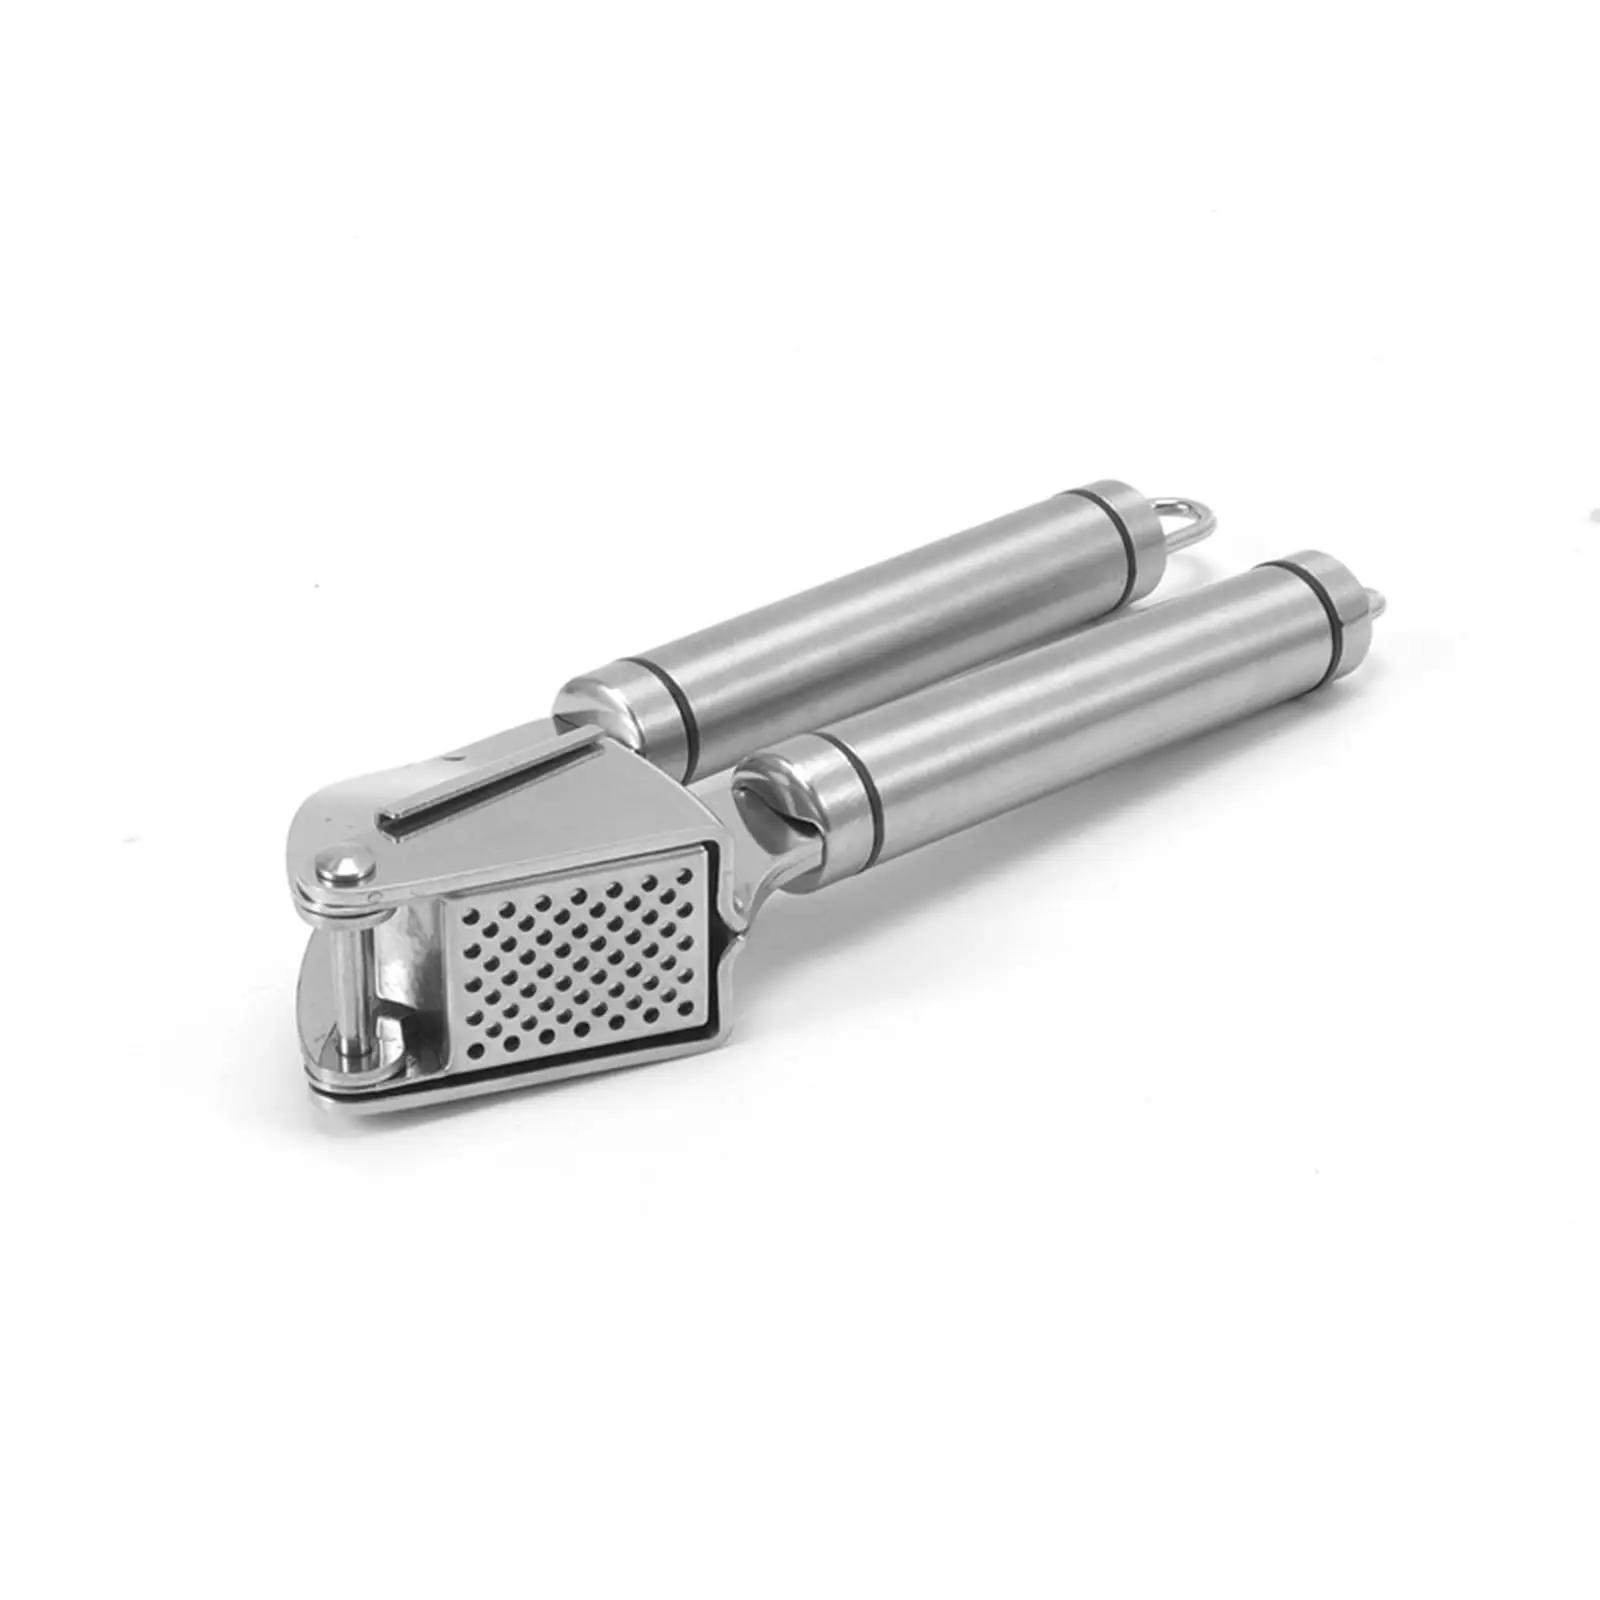 Stainless Steel Garlic Presses and Cleaning Brush with Garlic peelers Garlic Slicer Mincer Crusher Kitchen Accessories